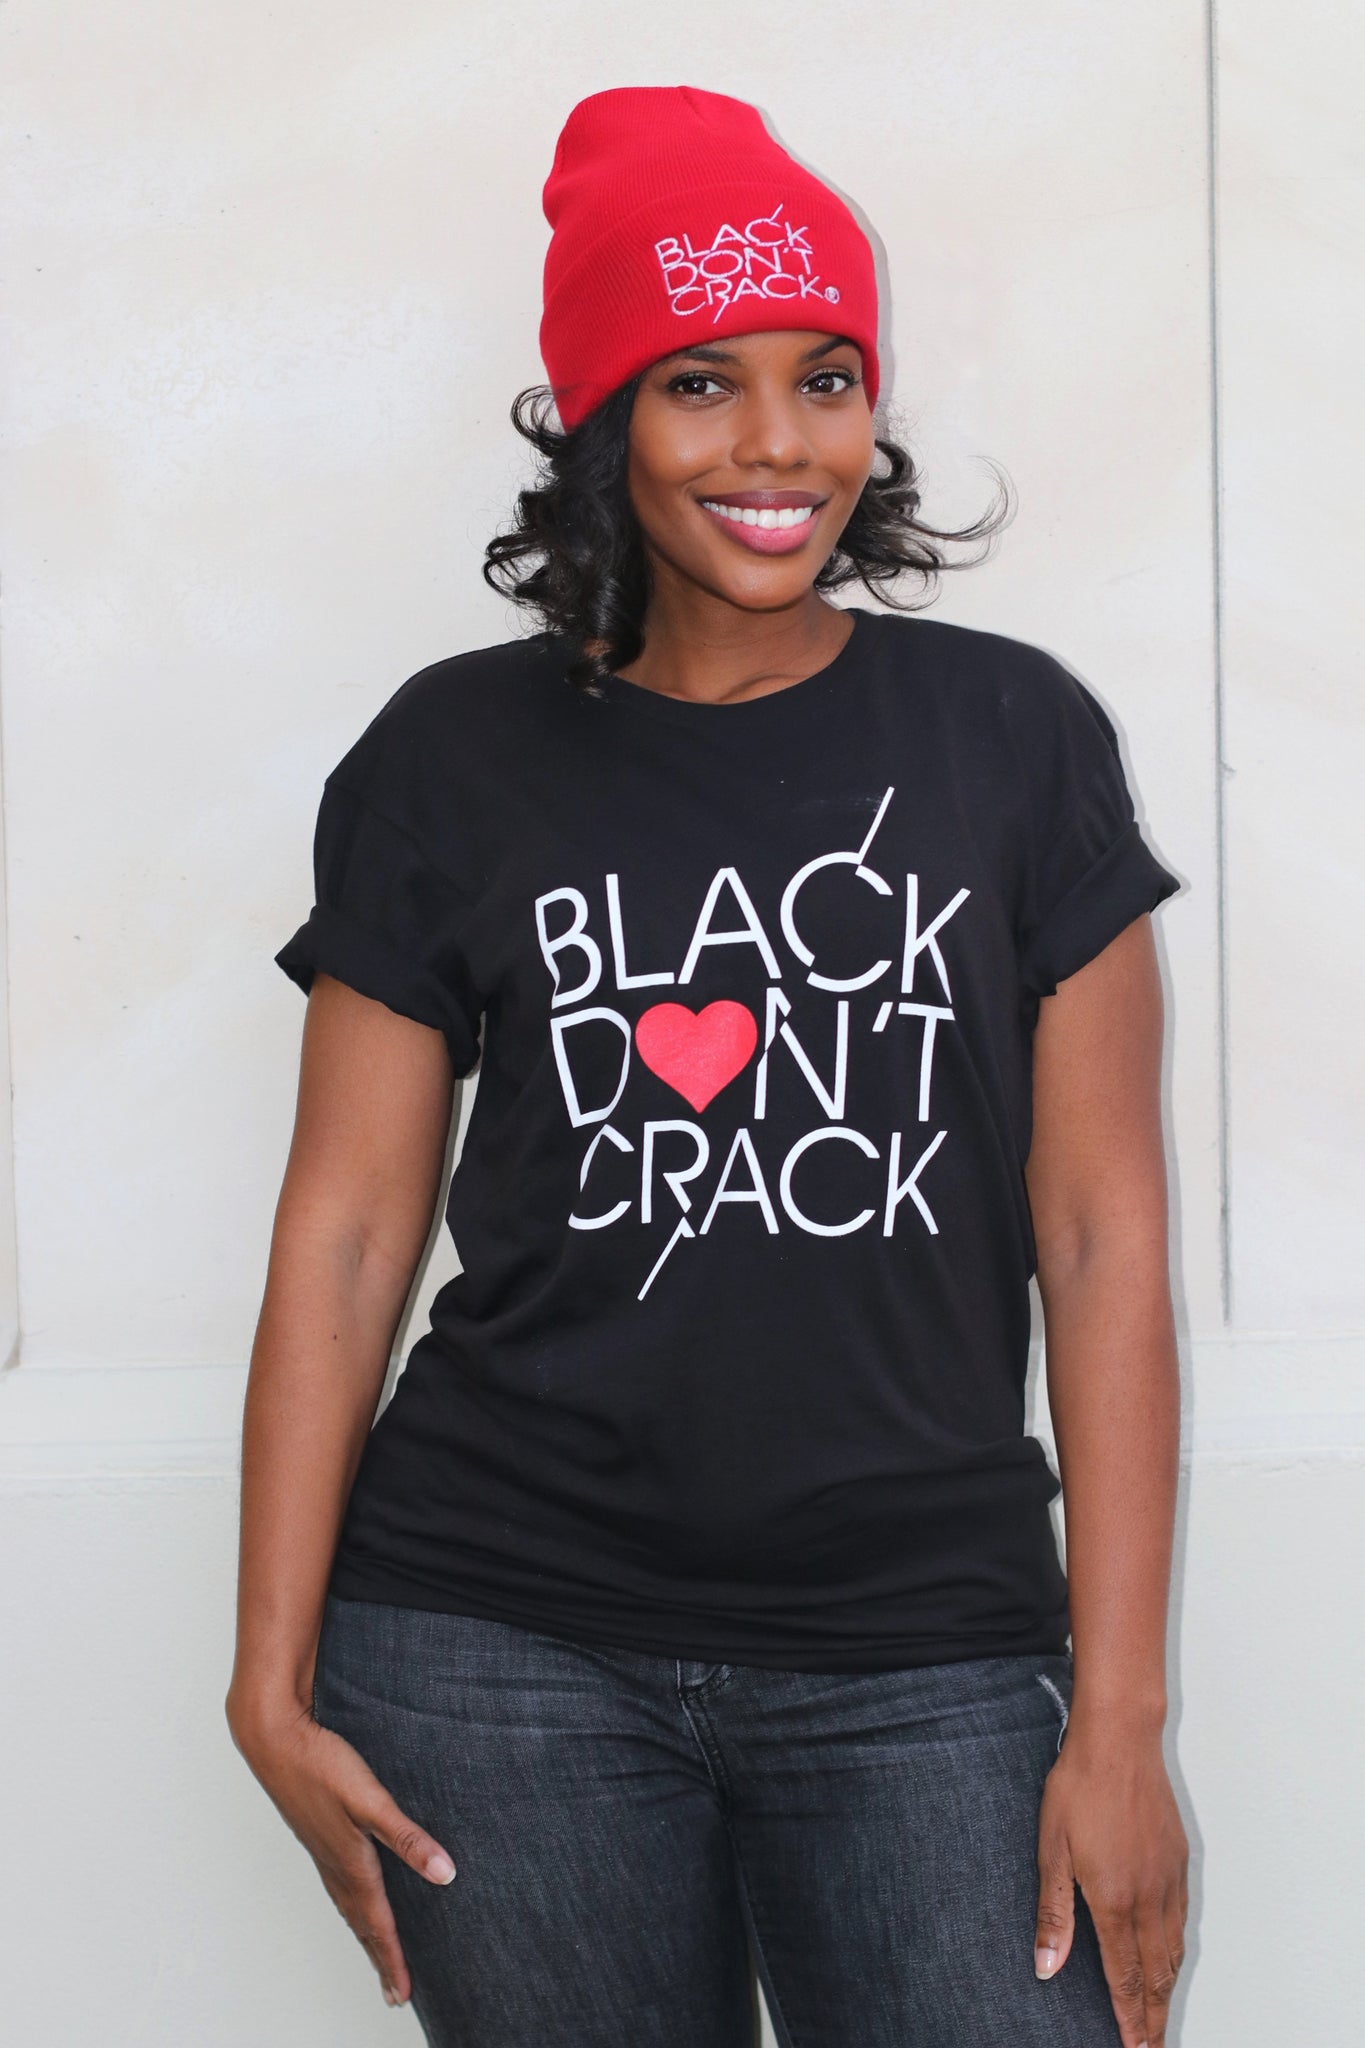 Black-Don't-Crack-Red-Roll Up-Cuff Beanie-Love Collection-Crew Neck